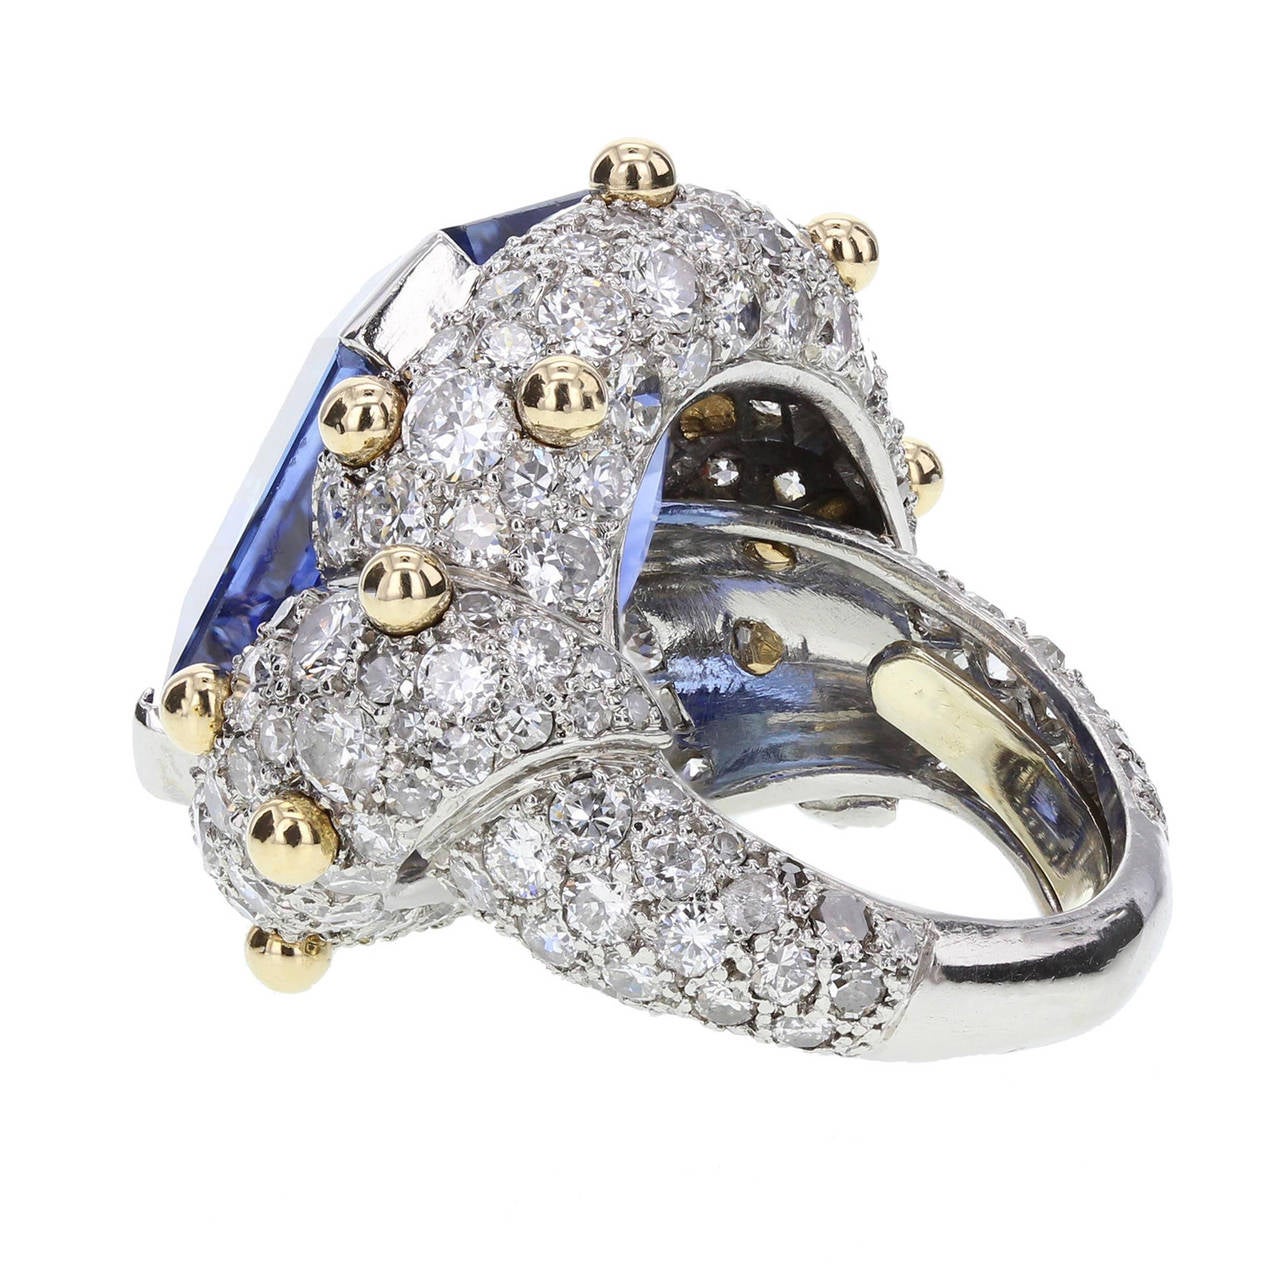 Jean Schlumberger Henri Picq Ceylon Sapphire Diamond Ring In Excellent Condition For Sale In Newcastle Upon Tyne, GB